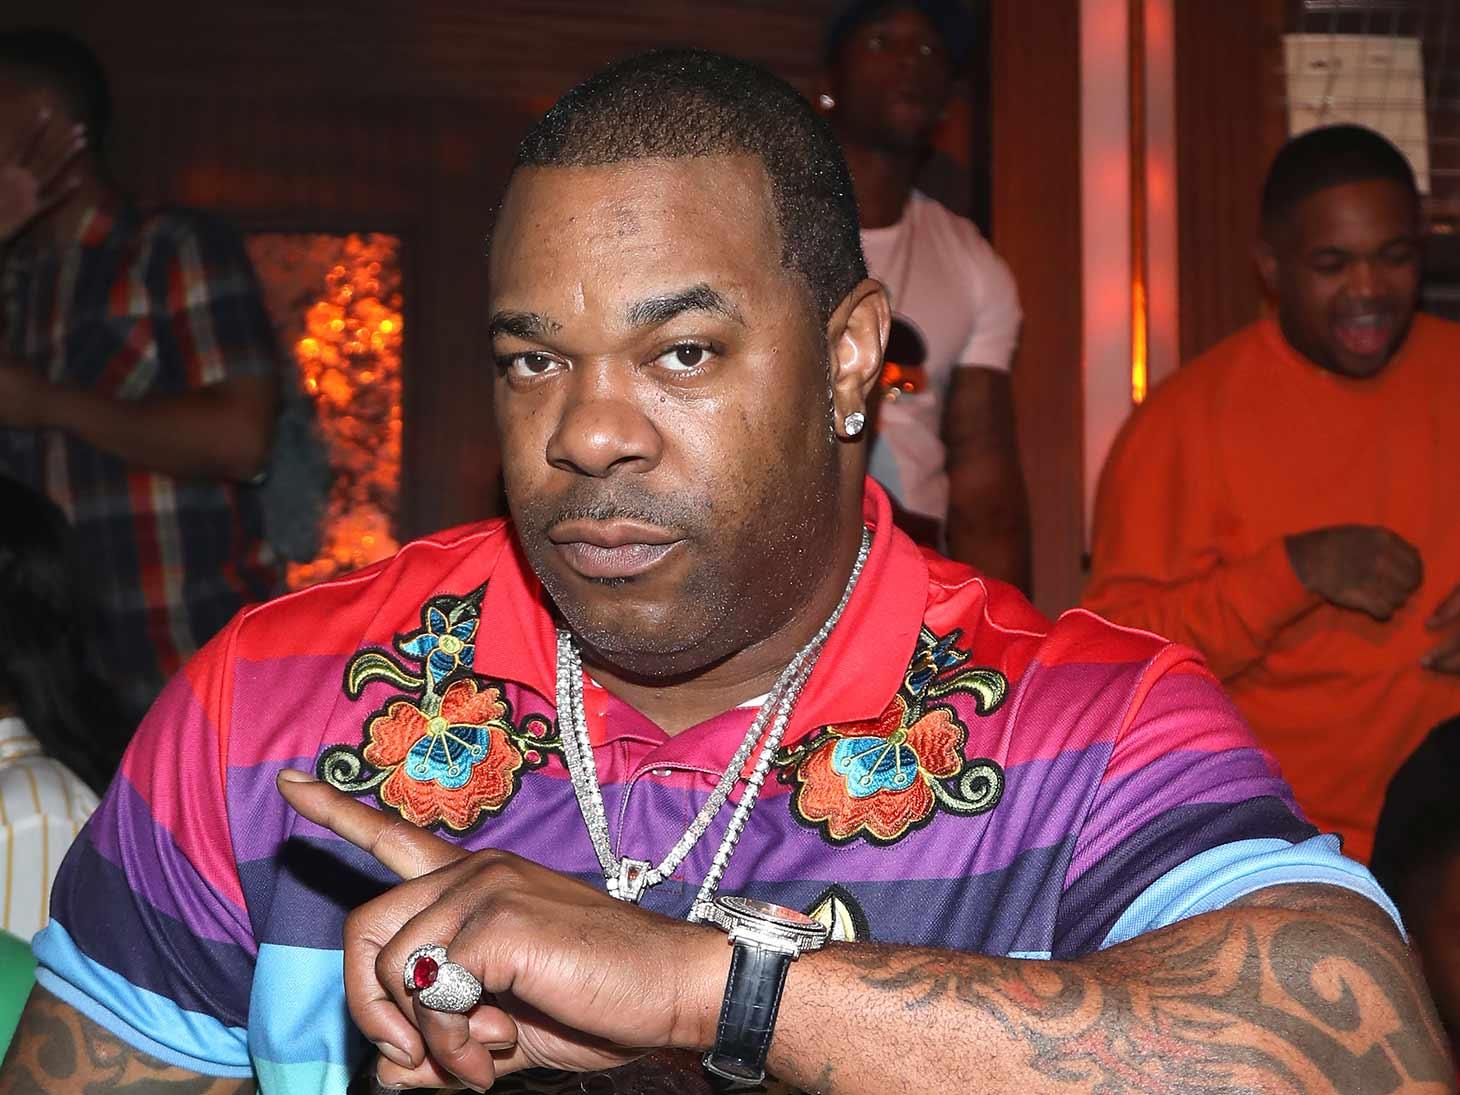 Busta Rhymes Files $1.5 Million Lawsuit Against a Man for Allegedly Pretending to Be His Manager